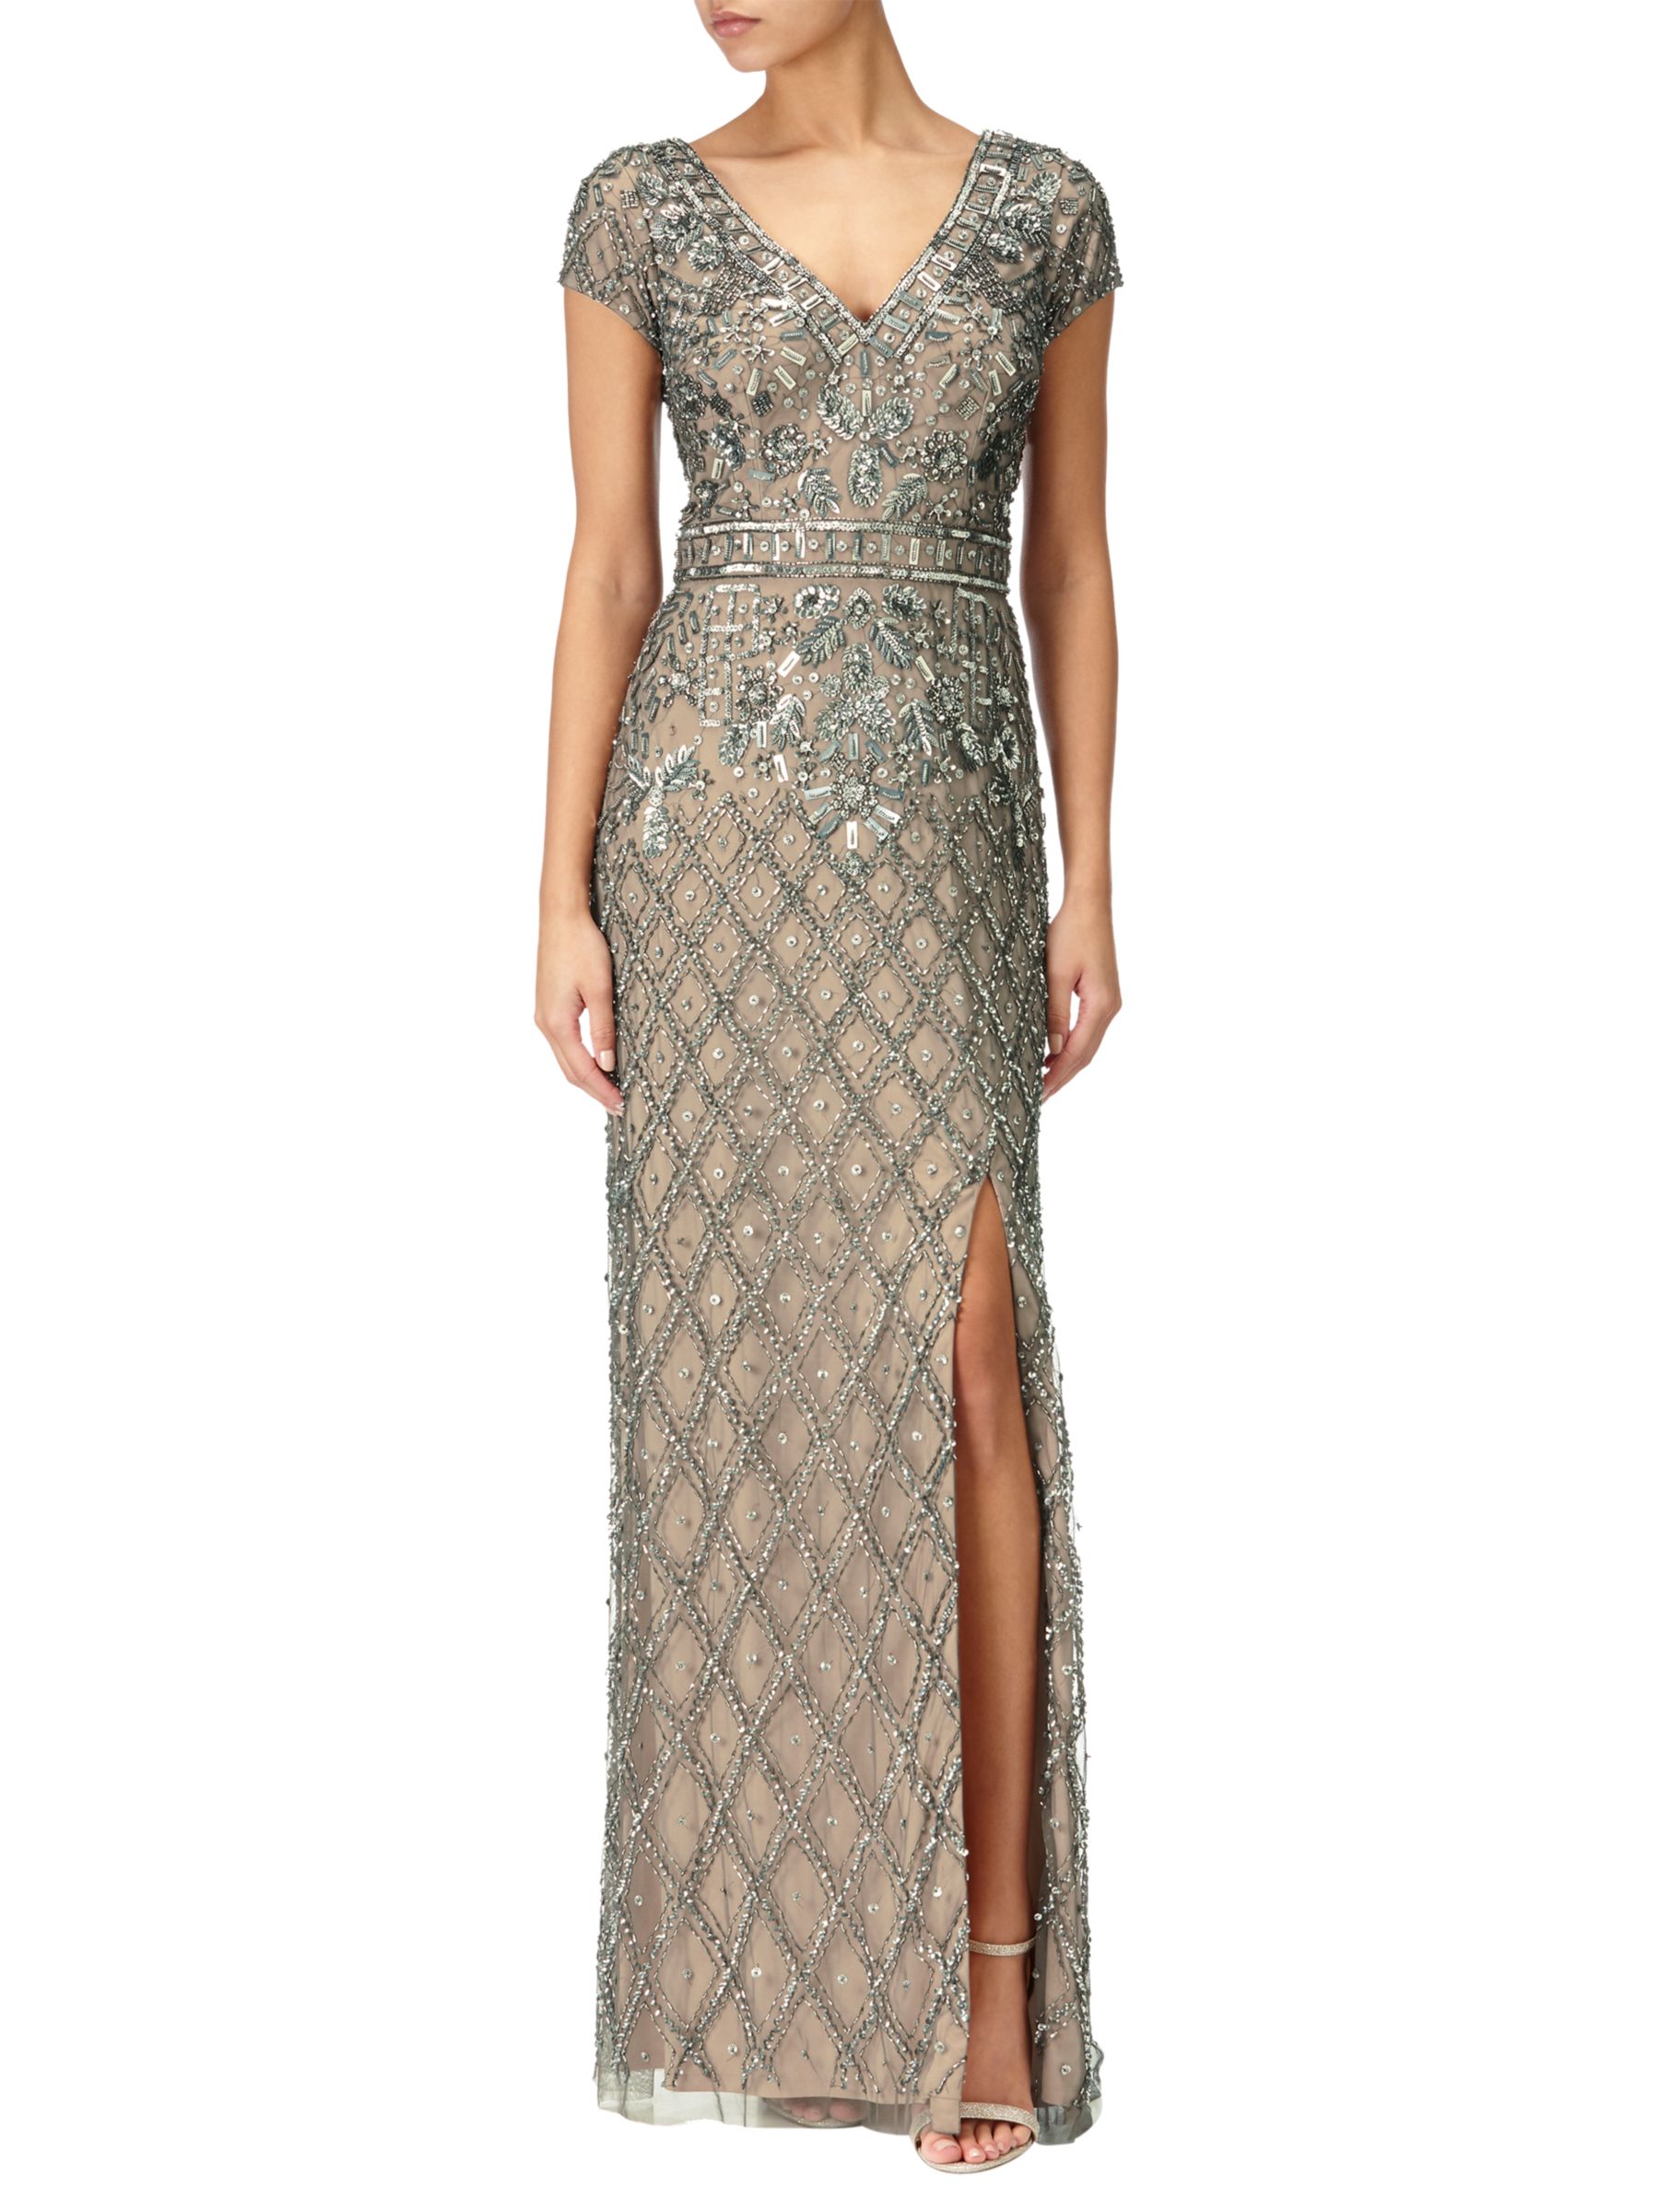 Adrianna Papell Beaded Deep V-Neck Gown, Lead/Nude